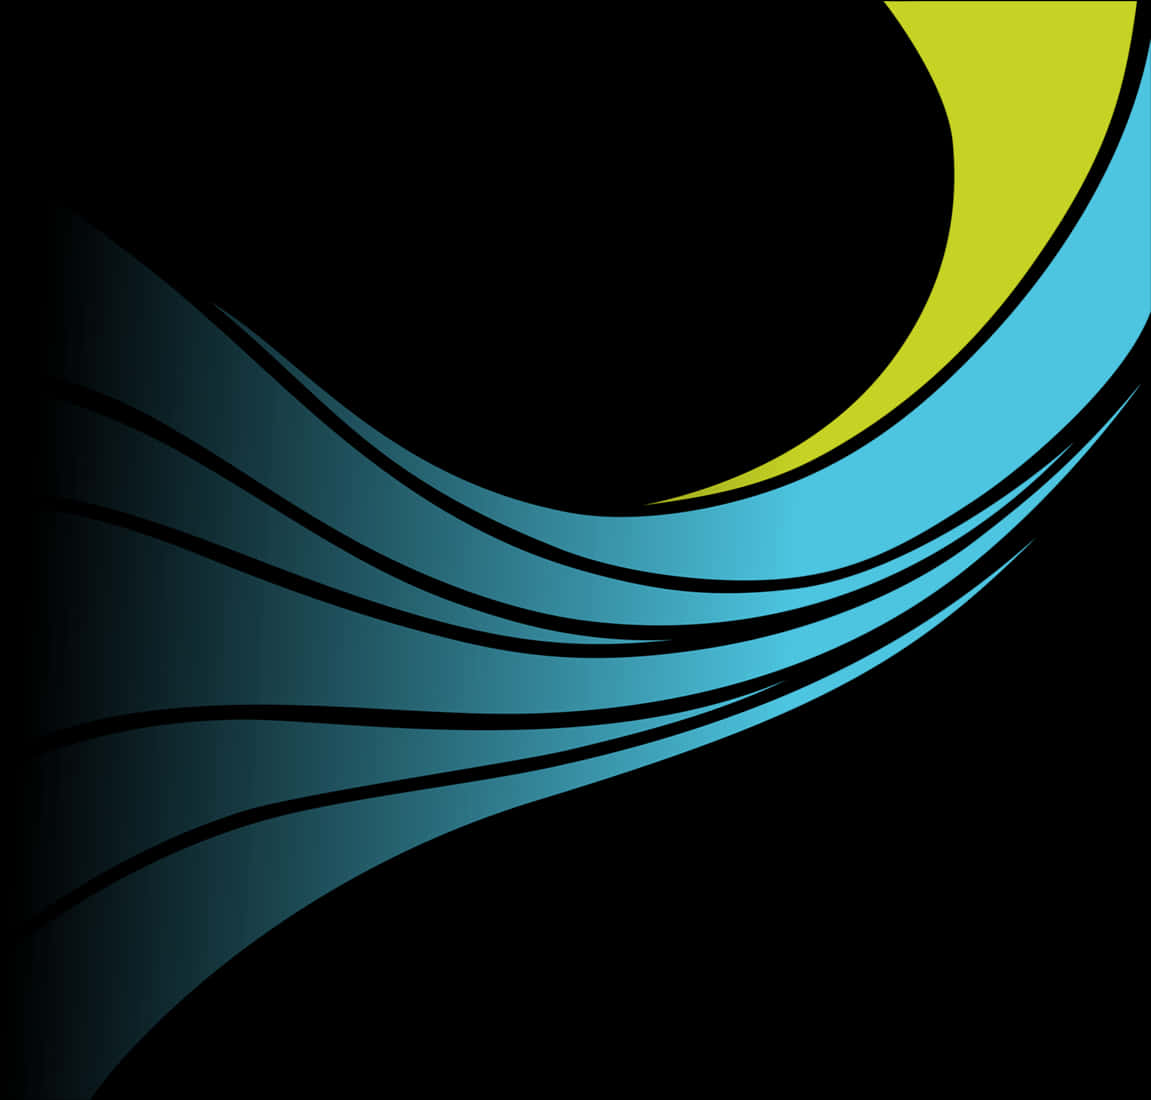 A Blue And Yellow Curved Lines On A Black Background